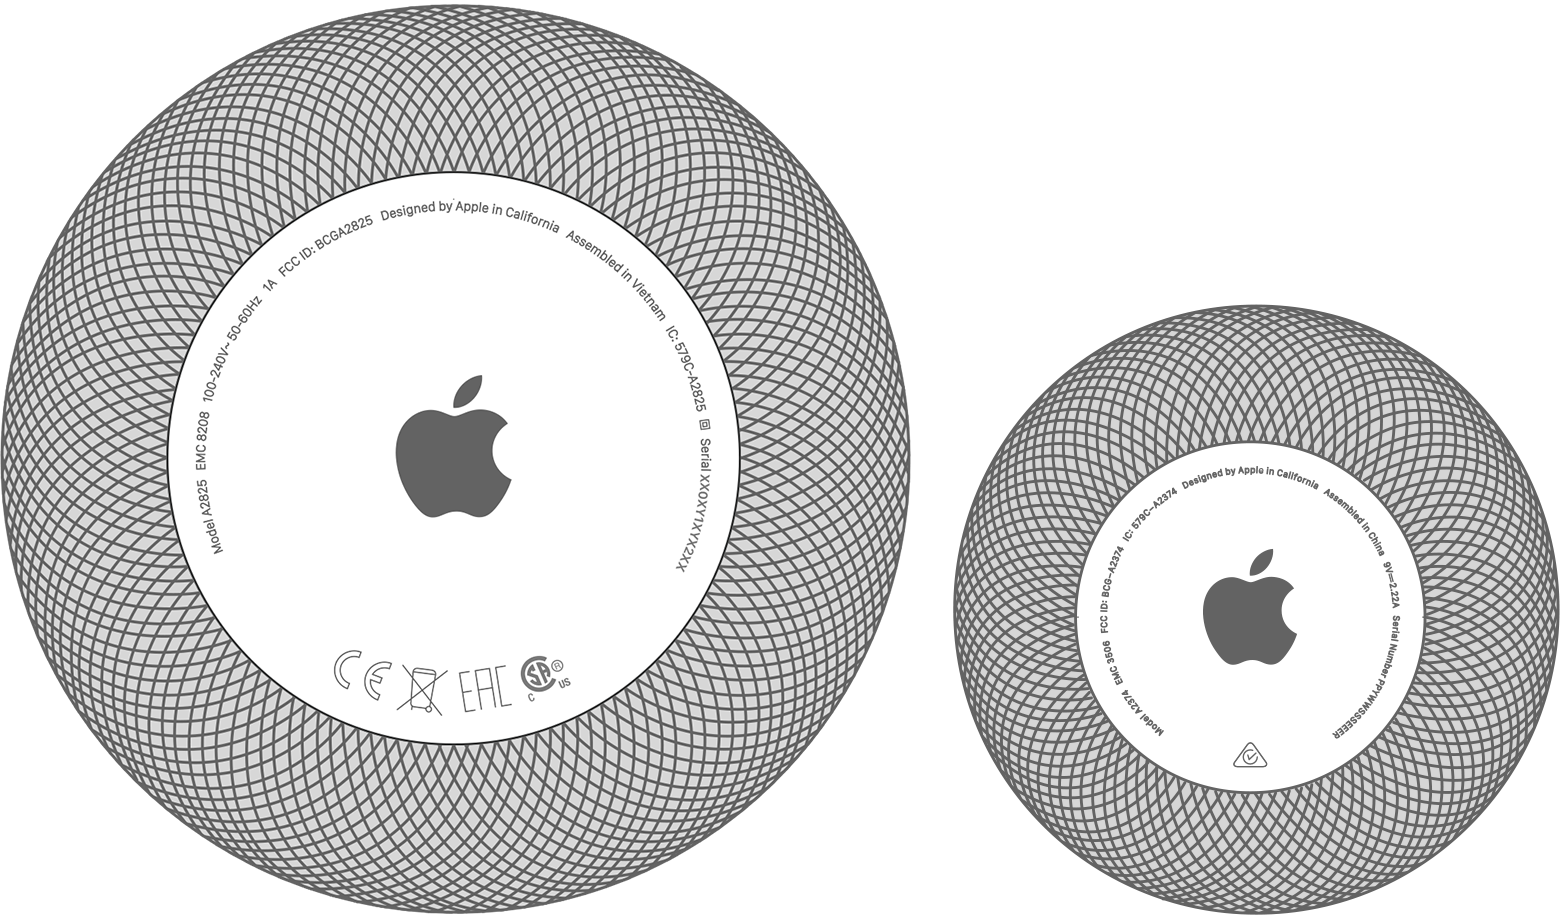 A bottom view of HomePod next to a bottom view of HomePod mini